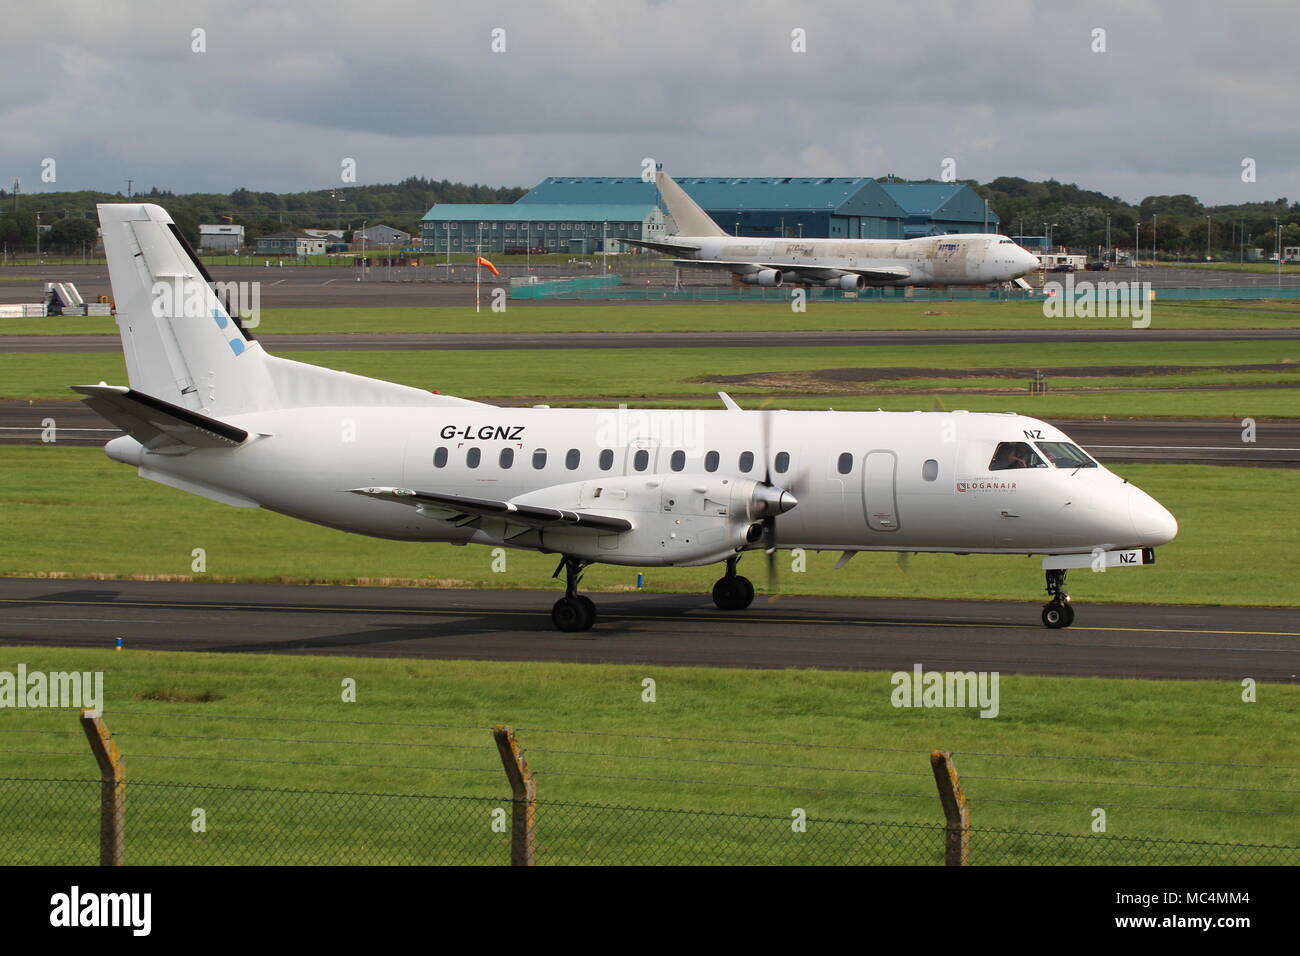 G-LGNZ, a Saab 340 operated by Loganair, at Pretswick International Airport in Ayrshire, Scotland. Stock Photo